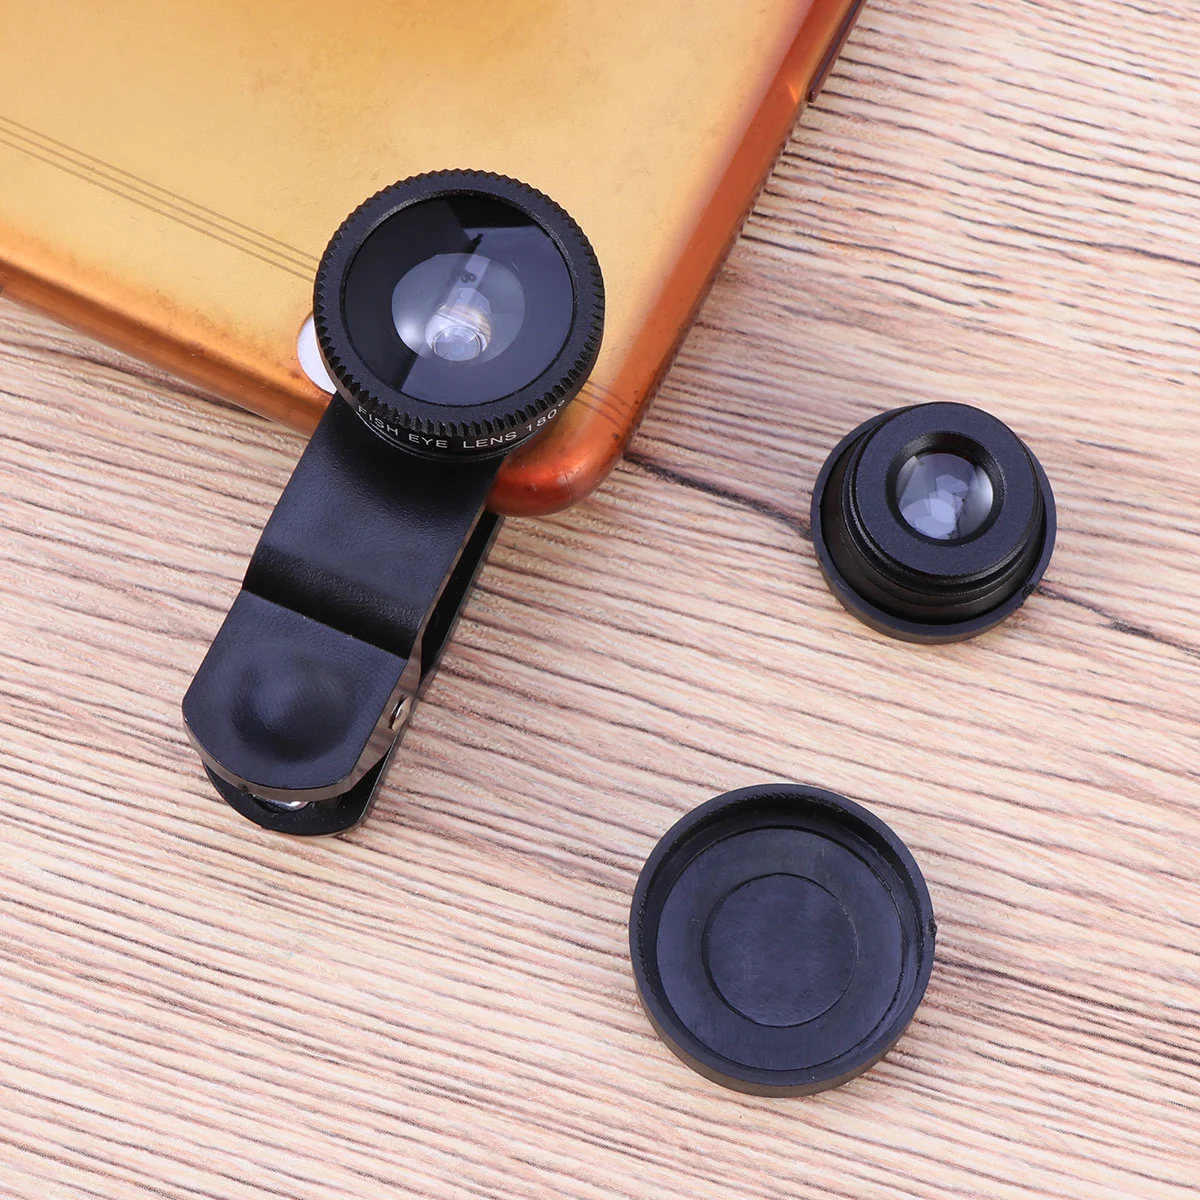 

Lens Forcamera Angle Macro Fisheye Wideeye Mobile Cellphone Clip Cellkit Attachmentset Attachments Lensescompatible Tool